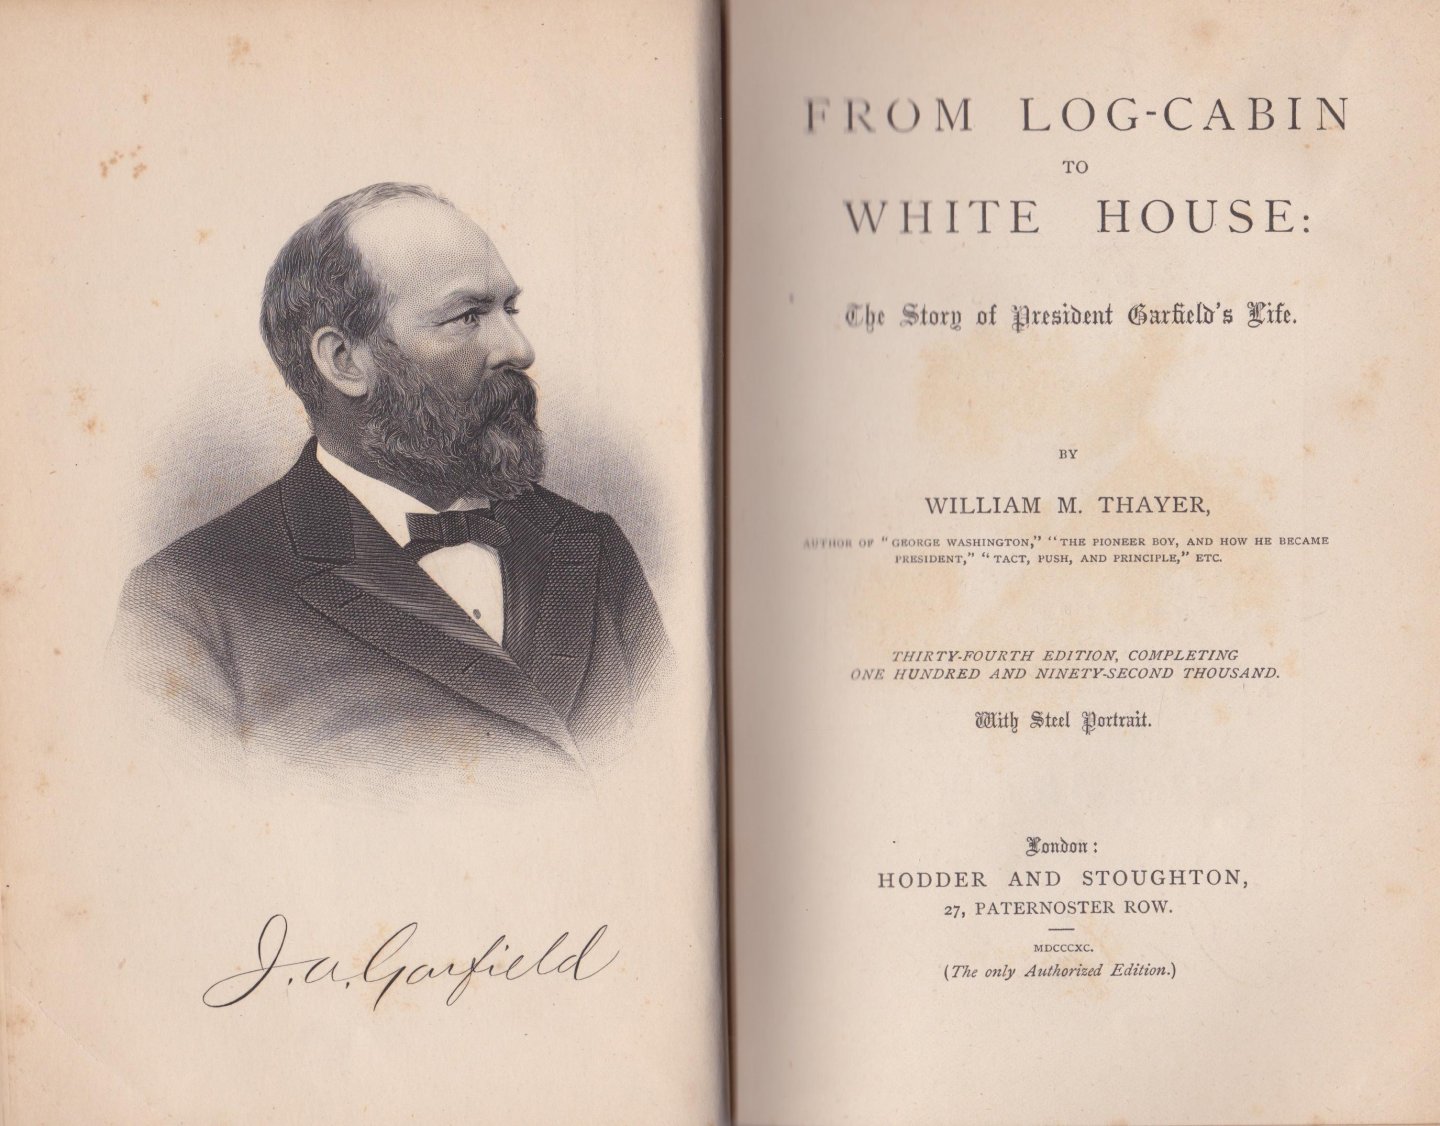 Thayer, William M. - From Log-Cabin to White House: The Story of President Garfield's Life. With Steel Portrait